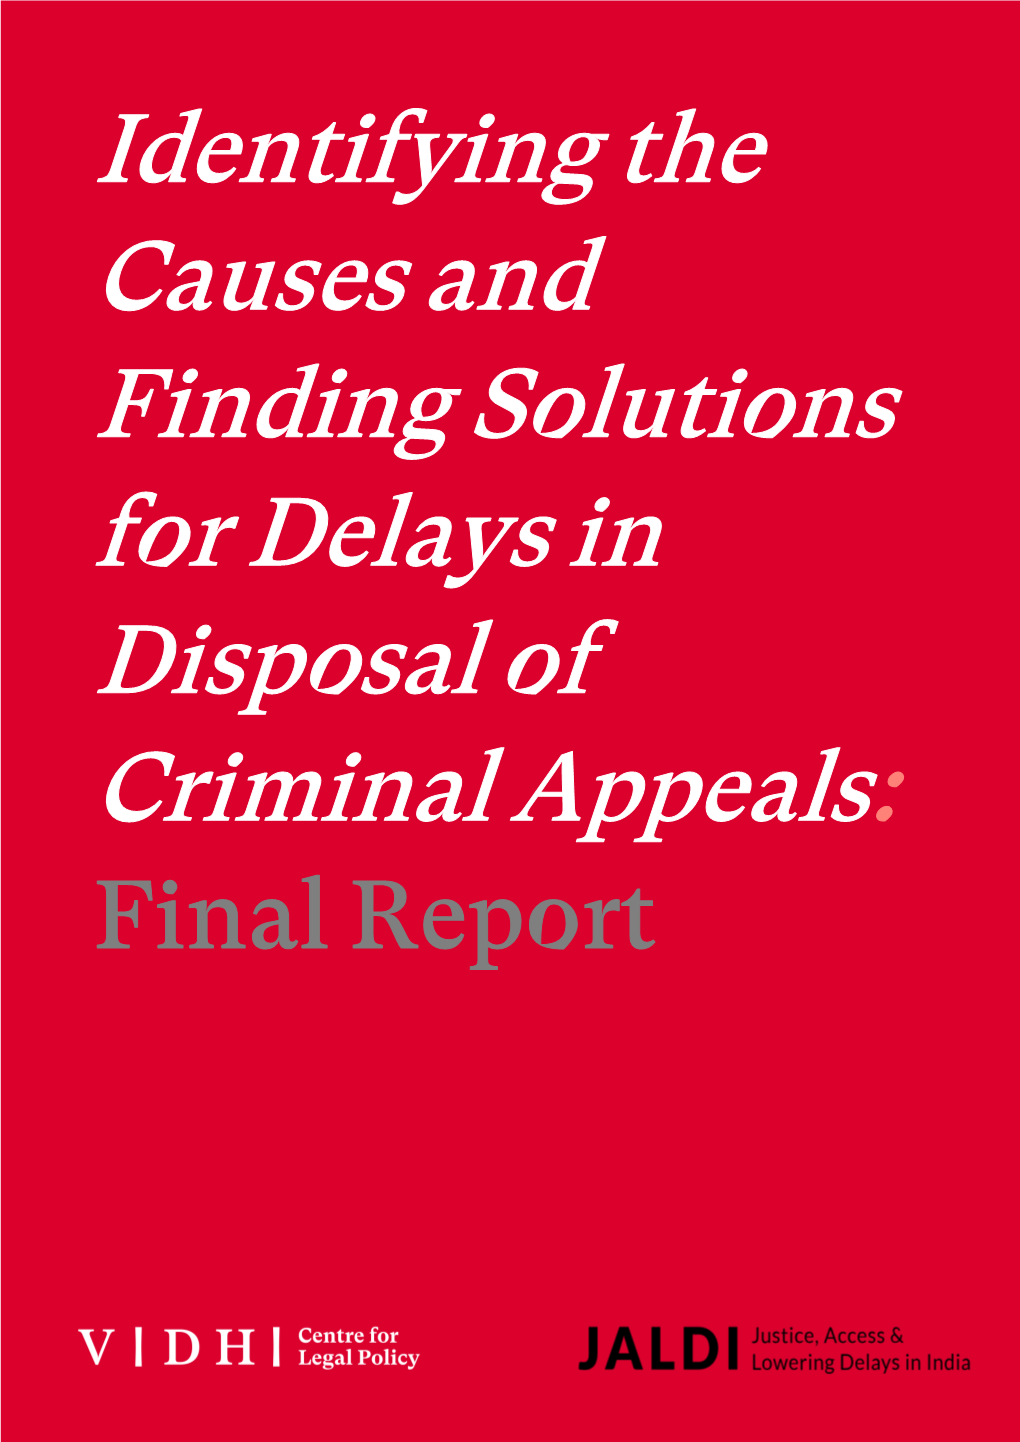 Identifying the Causes and Finding Solutions for Delays in Disposal of Criminal Appeals: Final Report